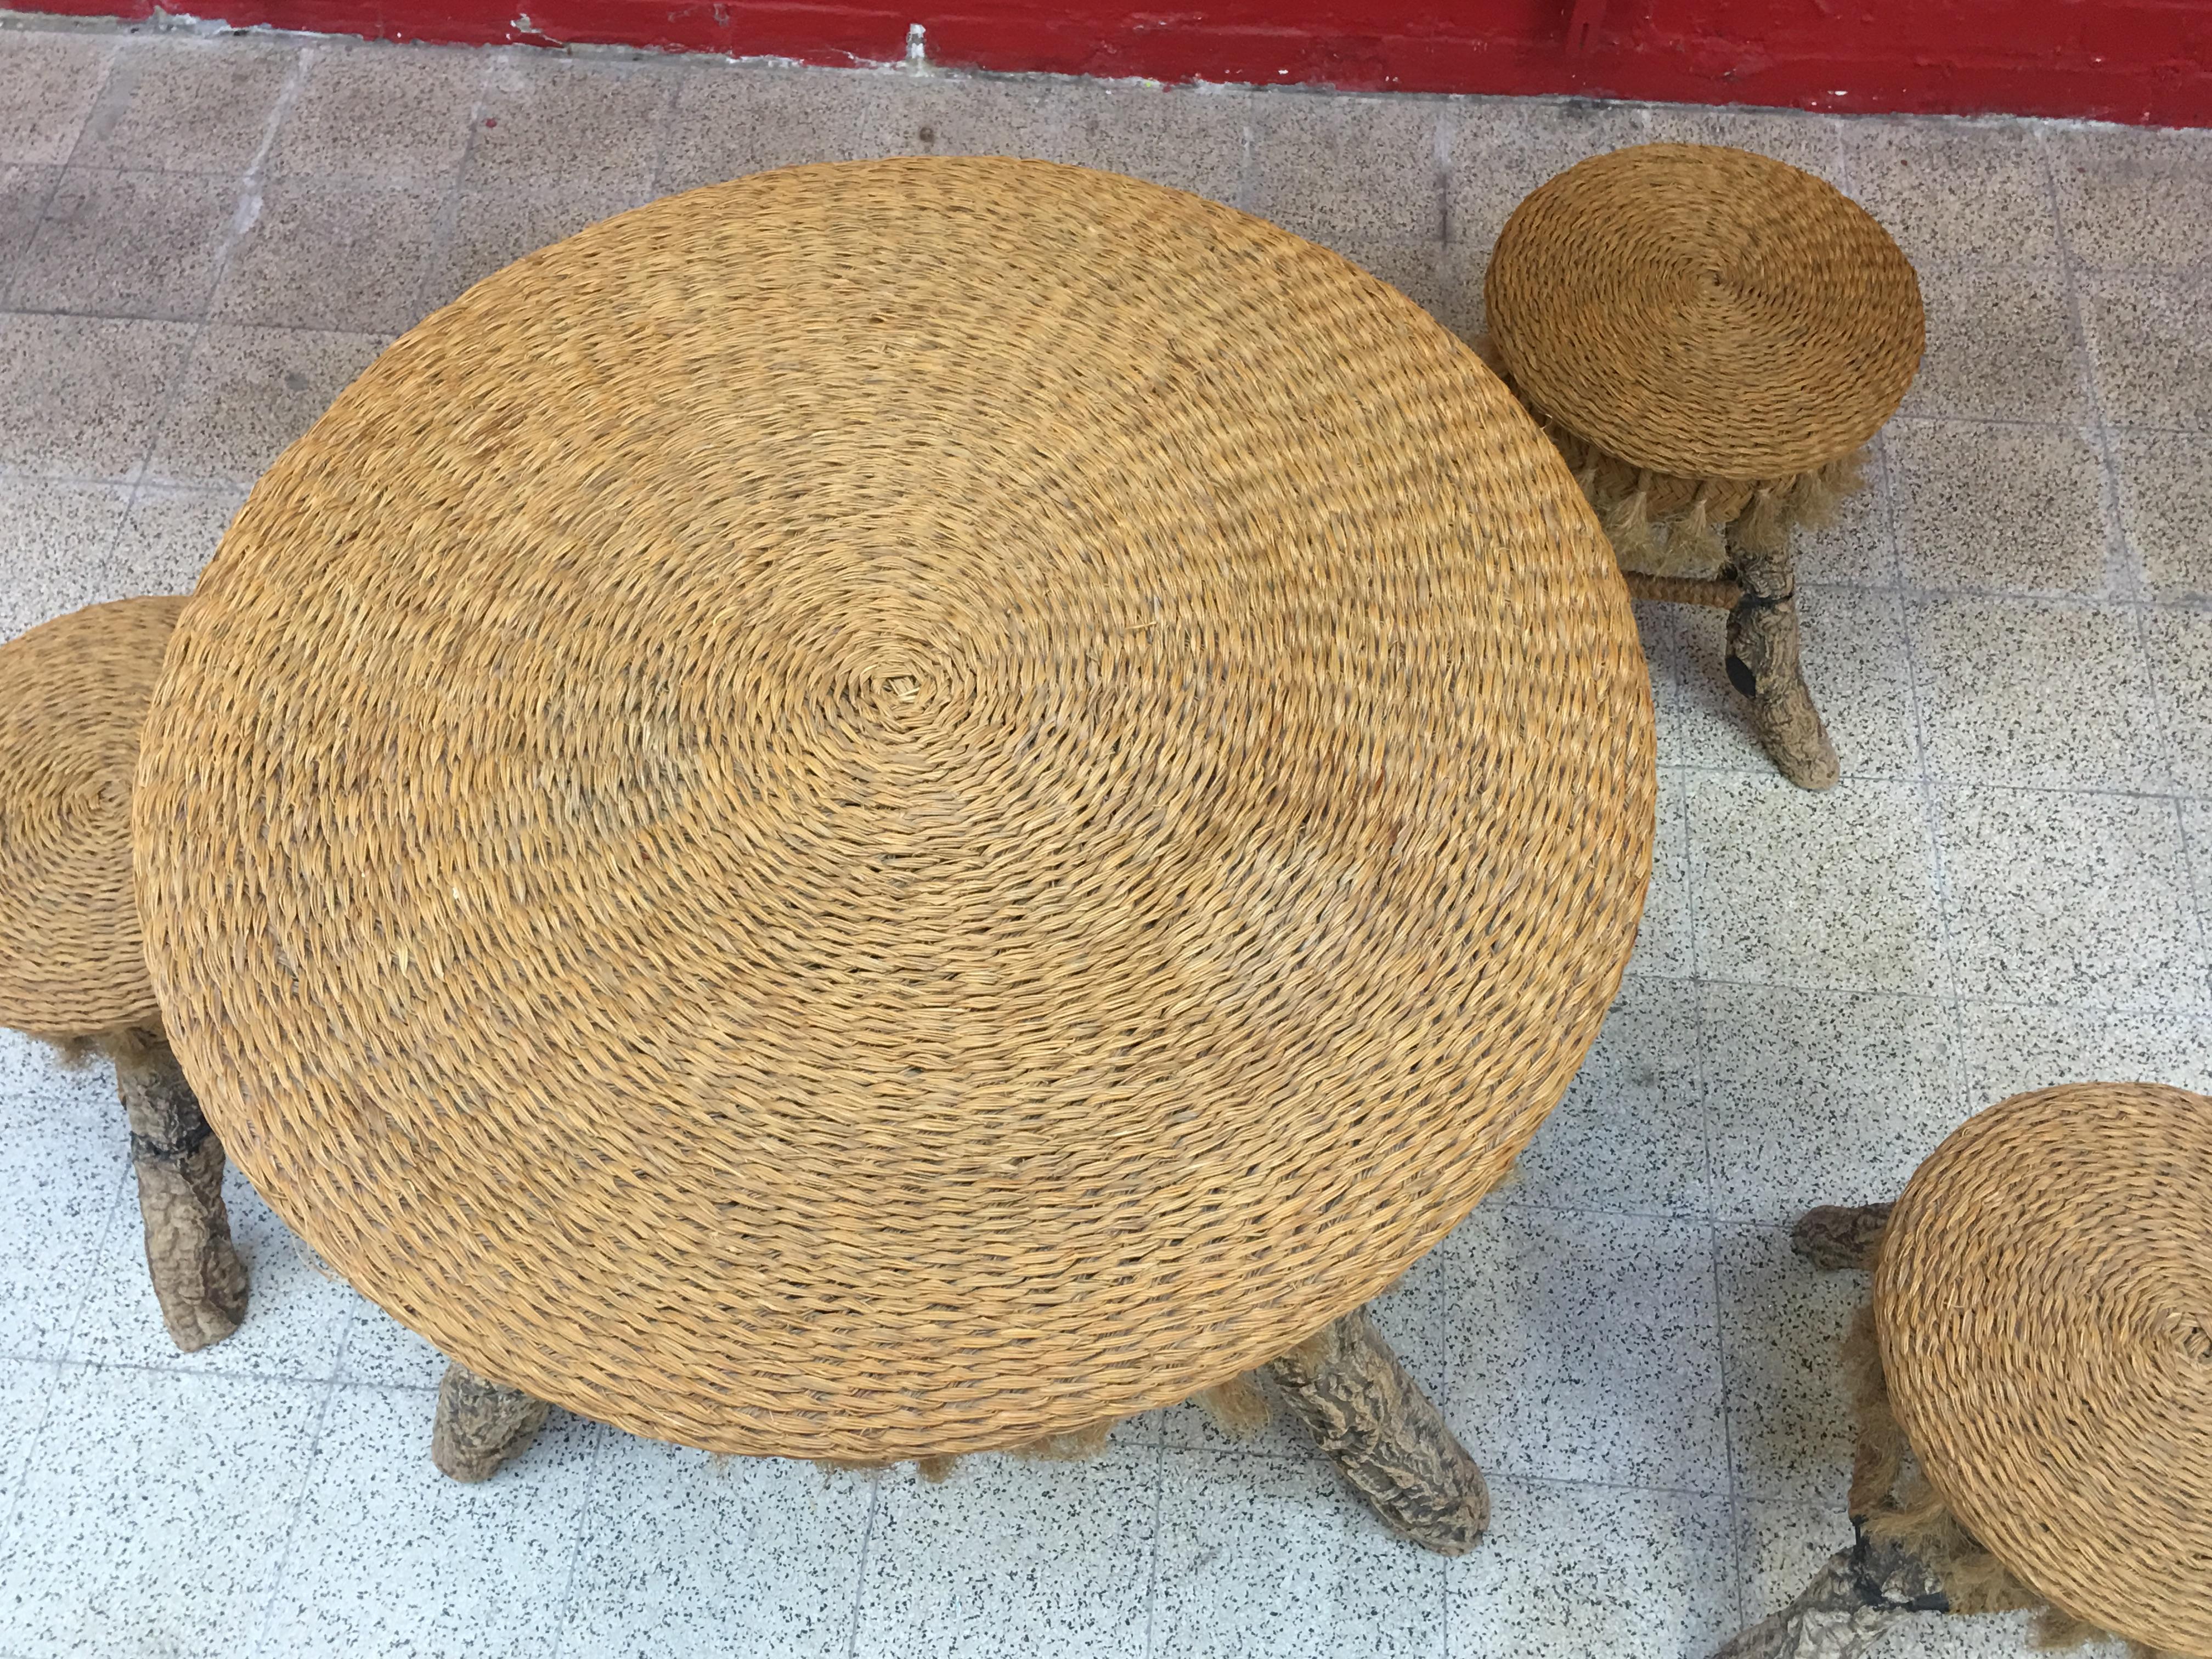 Organic Table and Its 4 Stools, Rattan, Rafia, Rope and Branches, circa 1970 For Sale 10